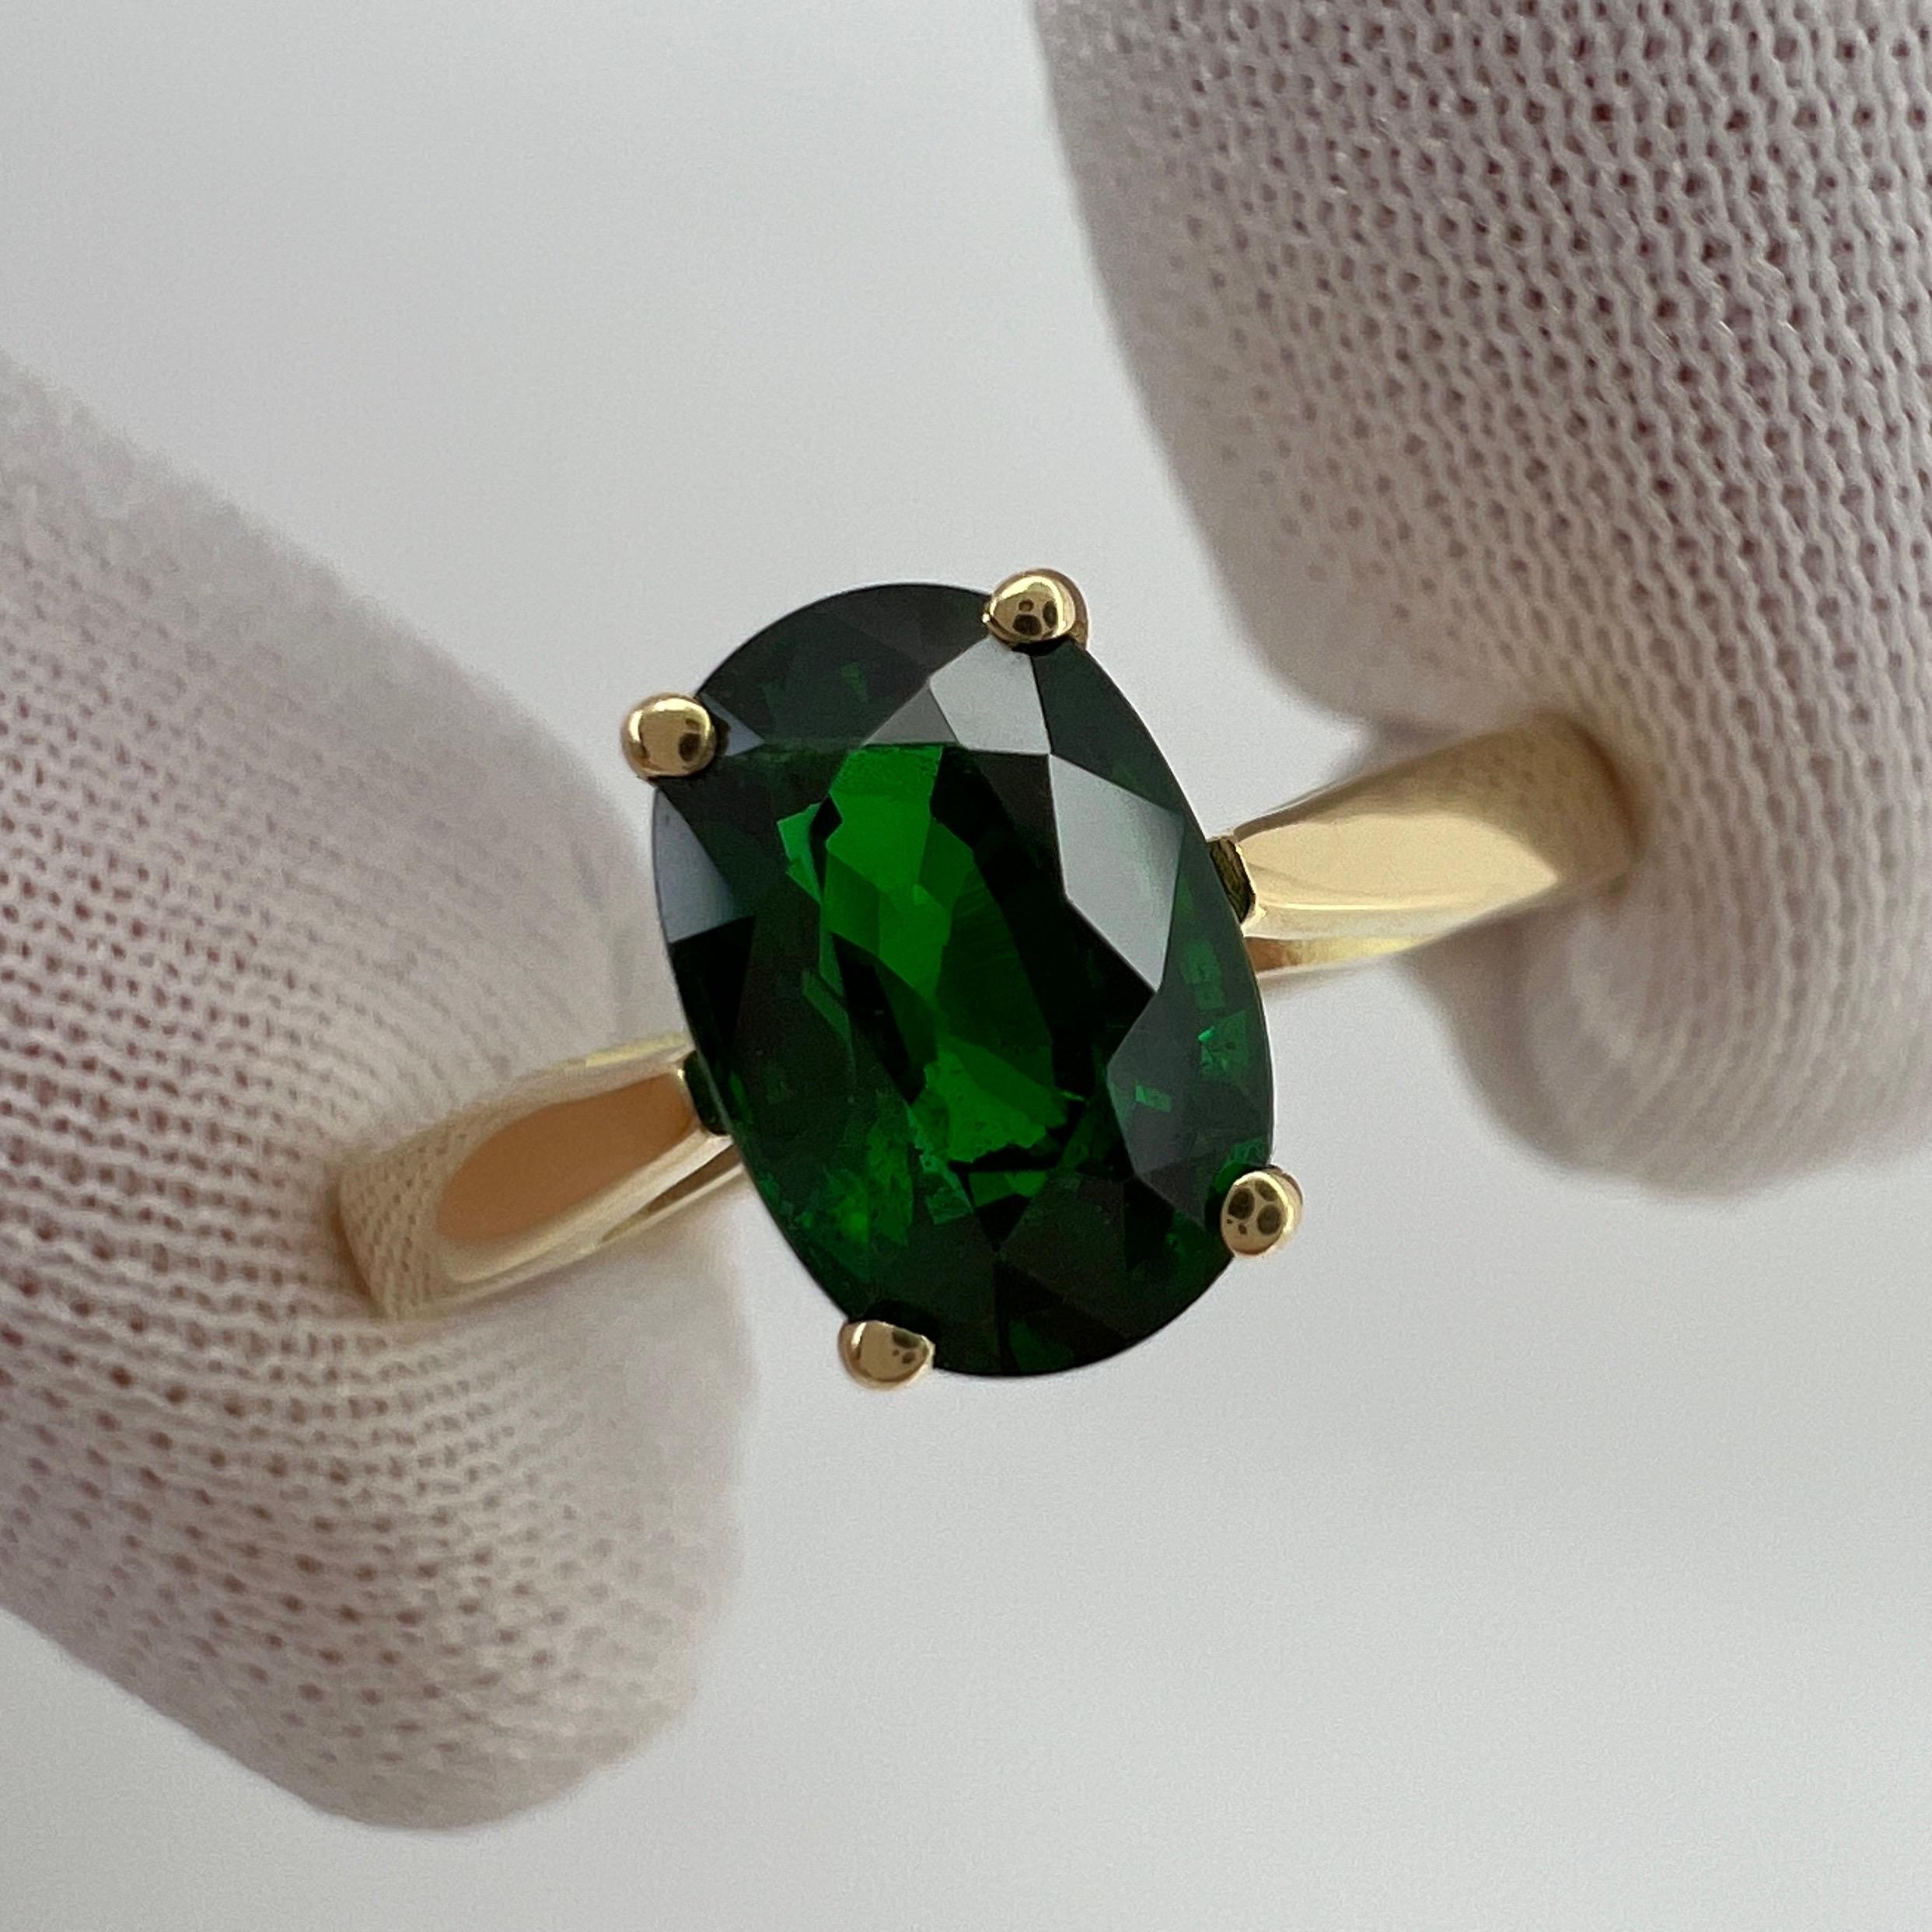 Fine Vivid Green Tsavorite Garnet 18k Yellow Gold Solitaire Ring.

Stunning 1.44 Carat tsavorite garnet with a beautiful vivid green colour and an excellent oval cut. Also has very good clarity with only some small natural inclusions visible when